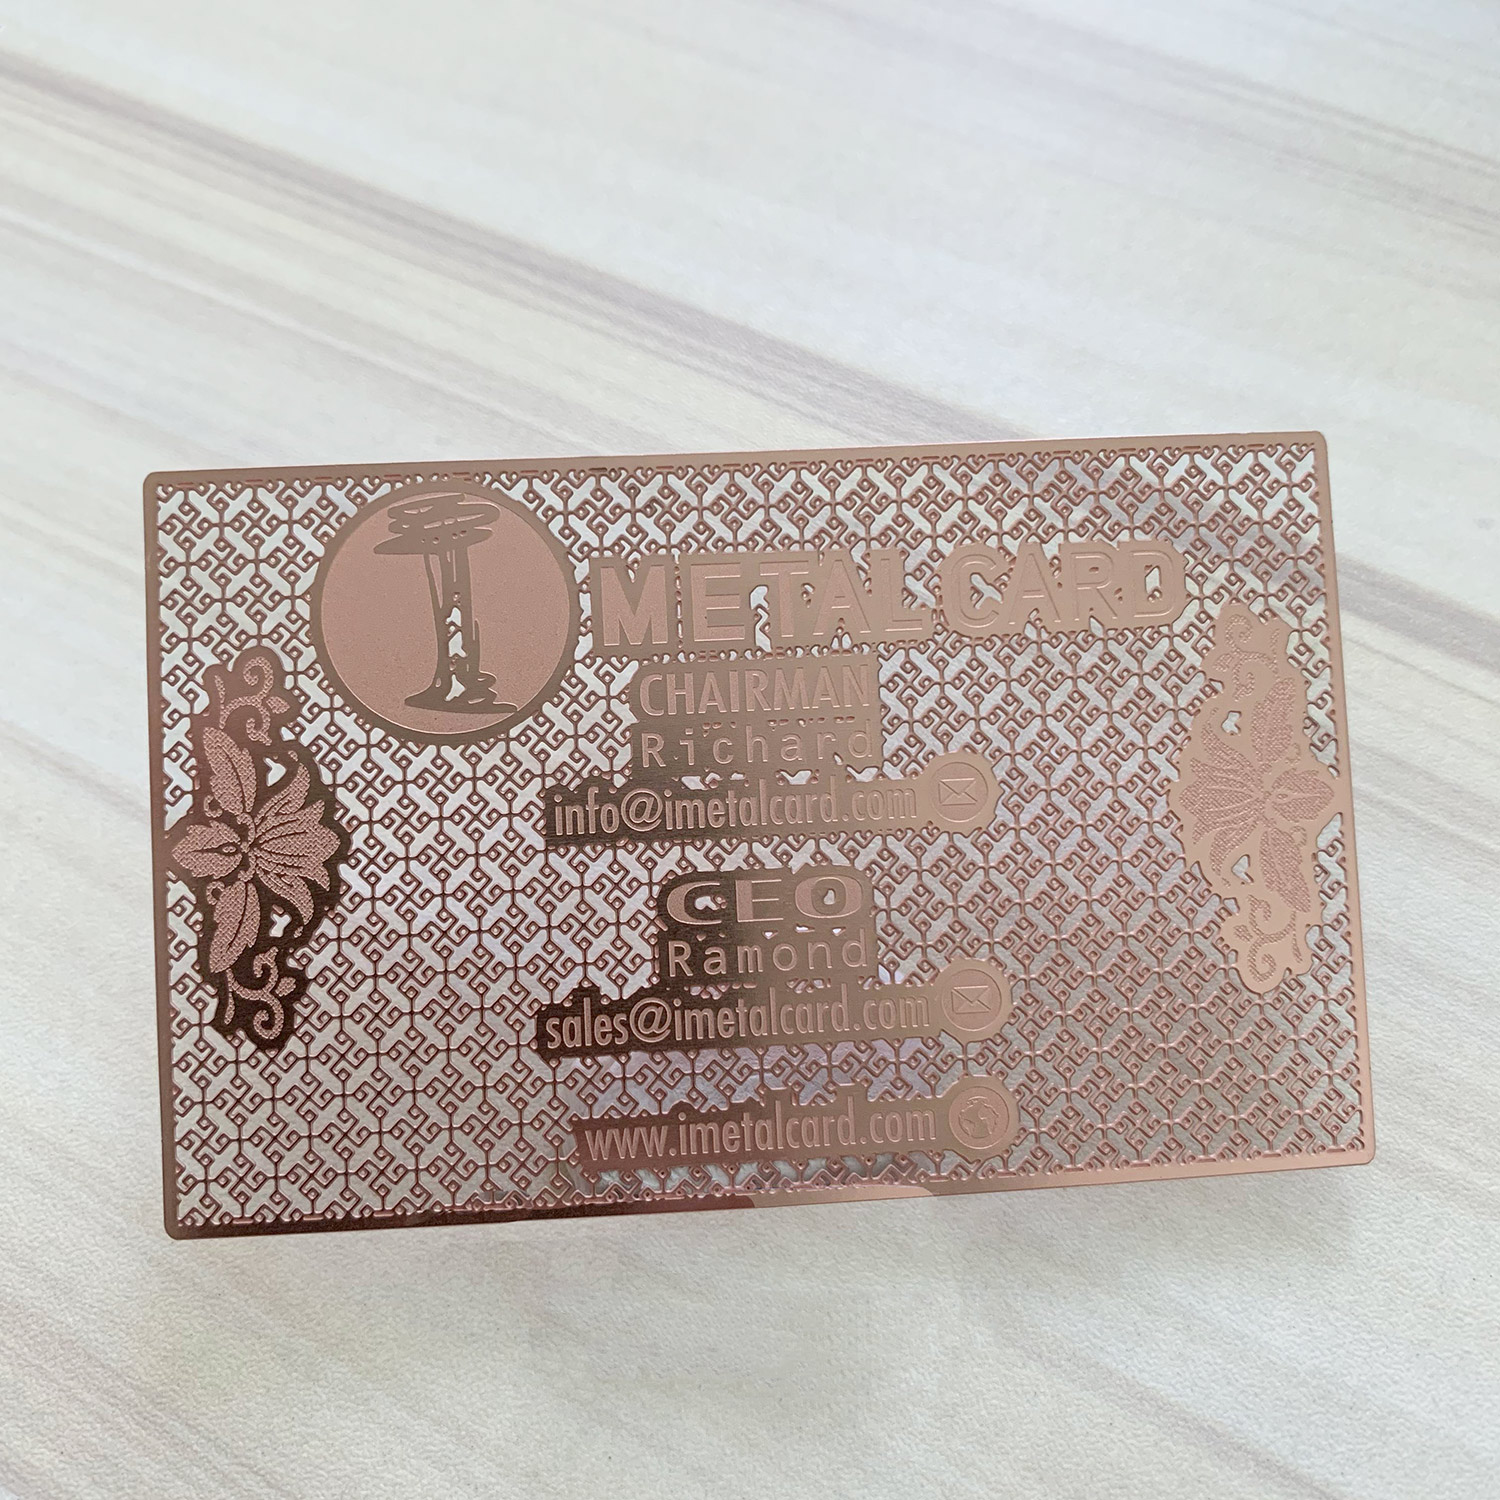 Rose gold metal business cards made out of stainless steel